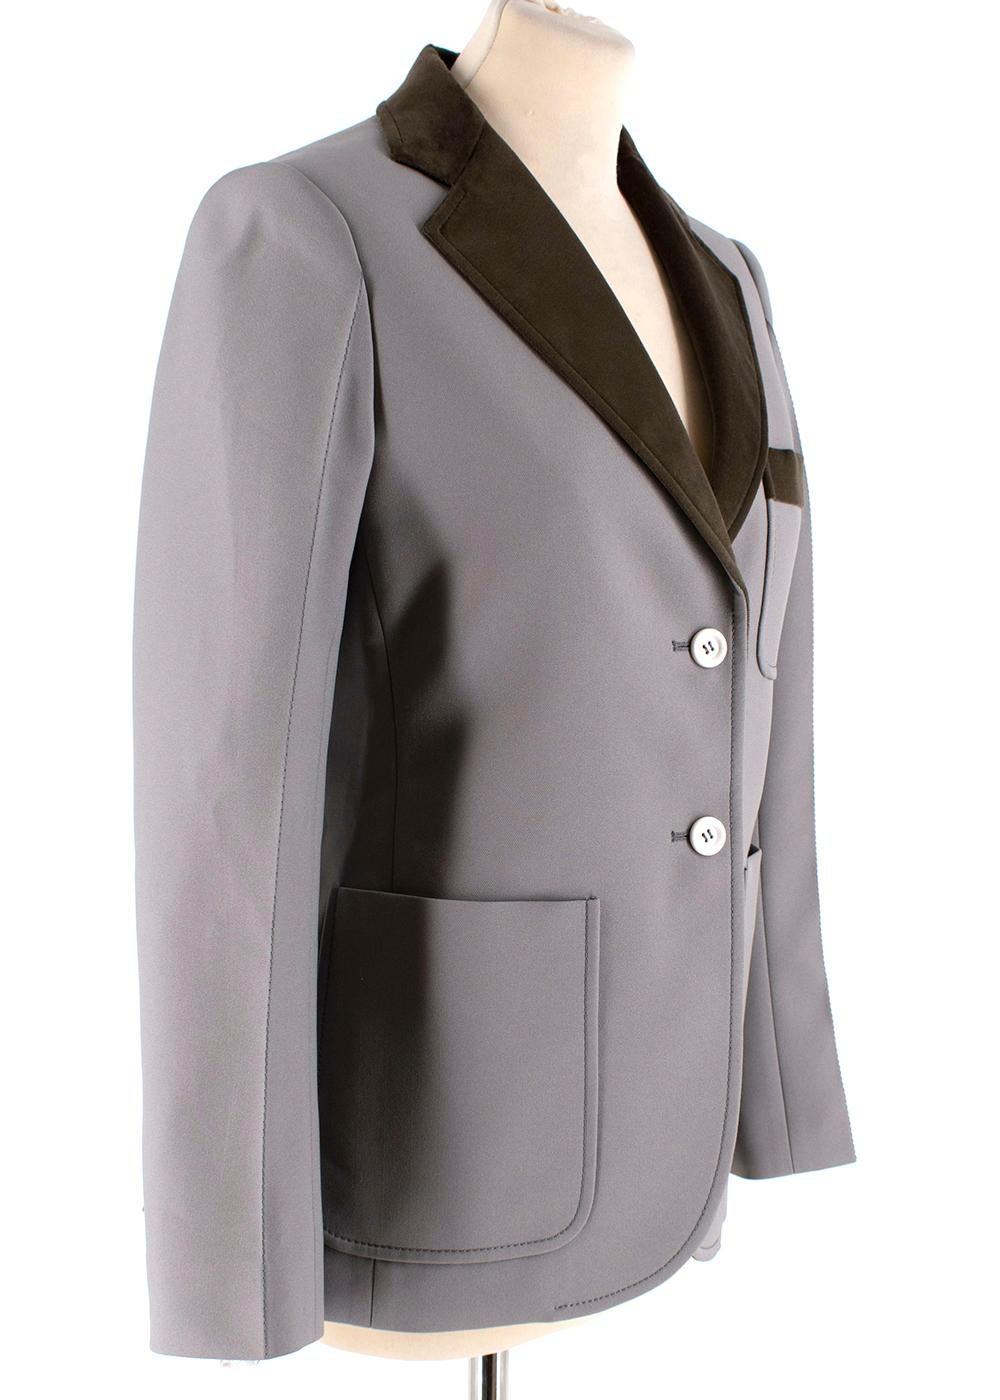 Louis Vuitton Grey Tailored Jacket with Velvet Trim

- Thick structured grey material
- Velvet green revere collar
- Dark grey top stitching
- White LV embossed buttons
- Open pockets x3
- Velvet logo & 3 white matte buttons on the cuffs
- Black